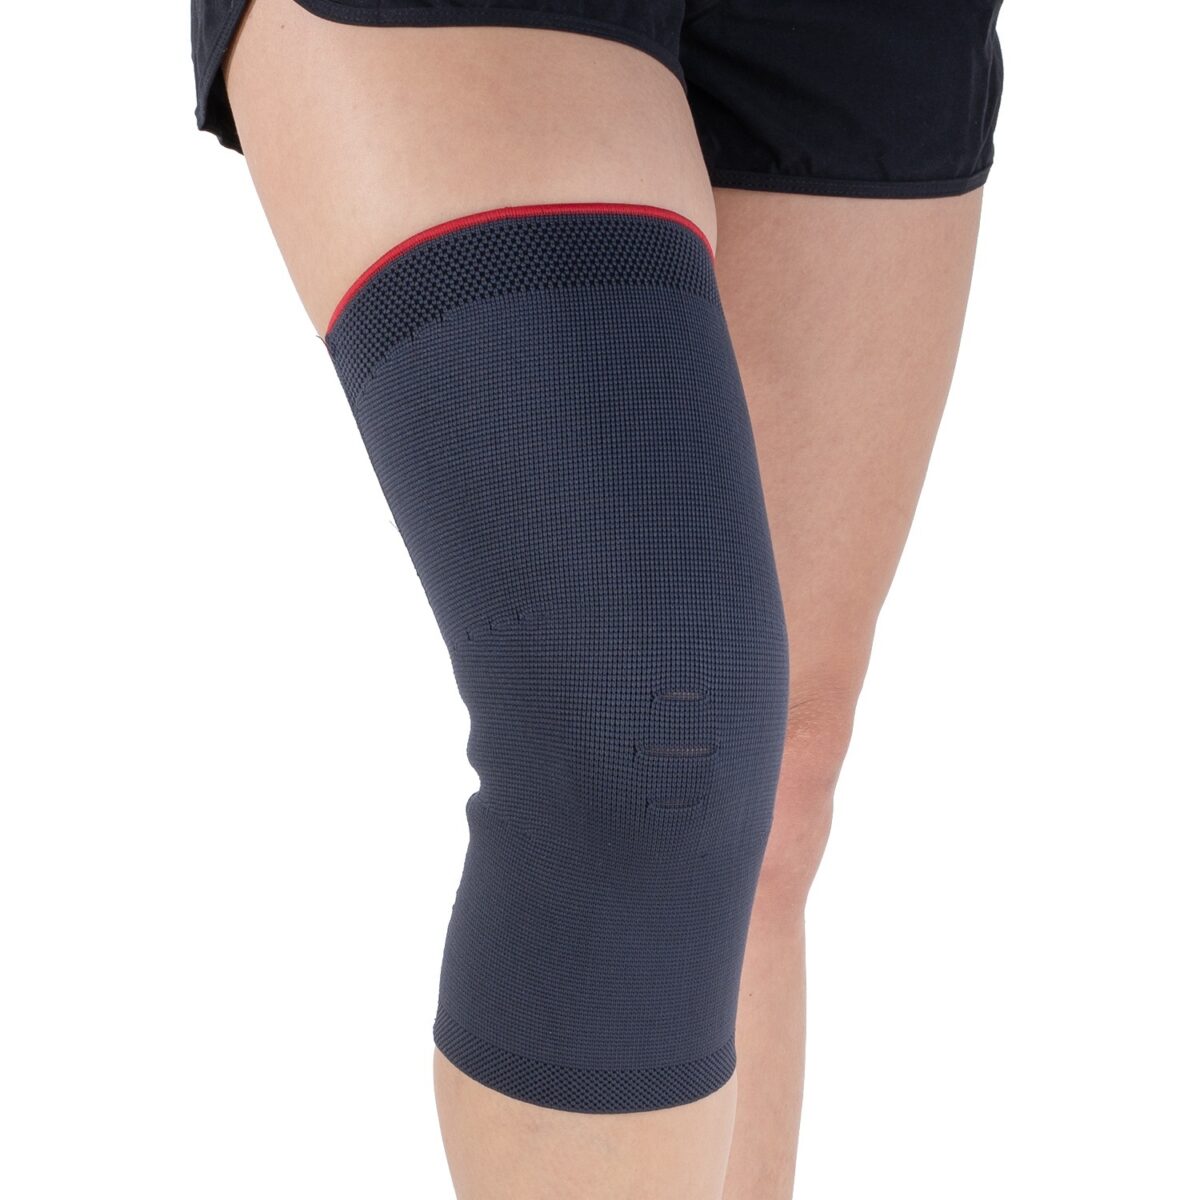 wingmed orthopedic equipments W501 woven knee support 87